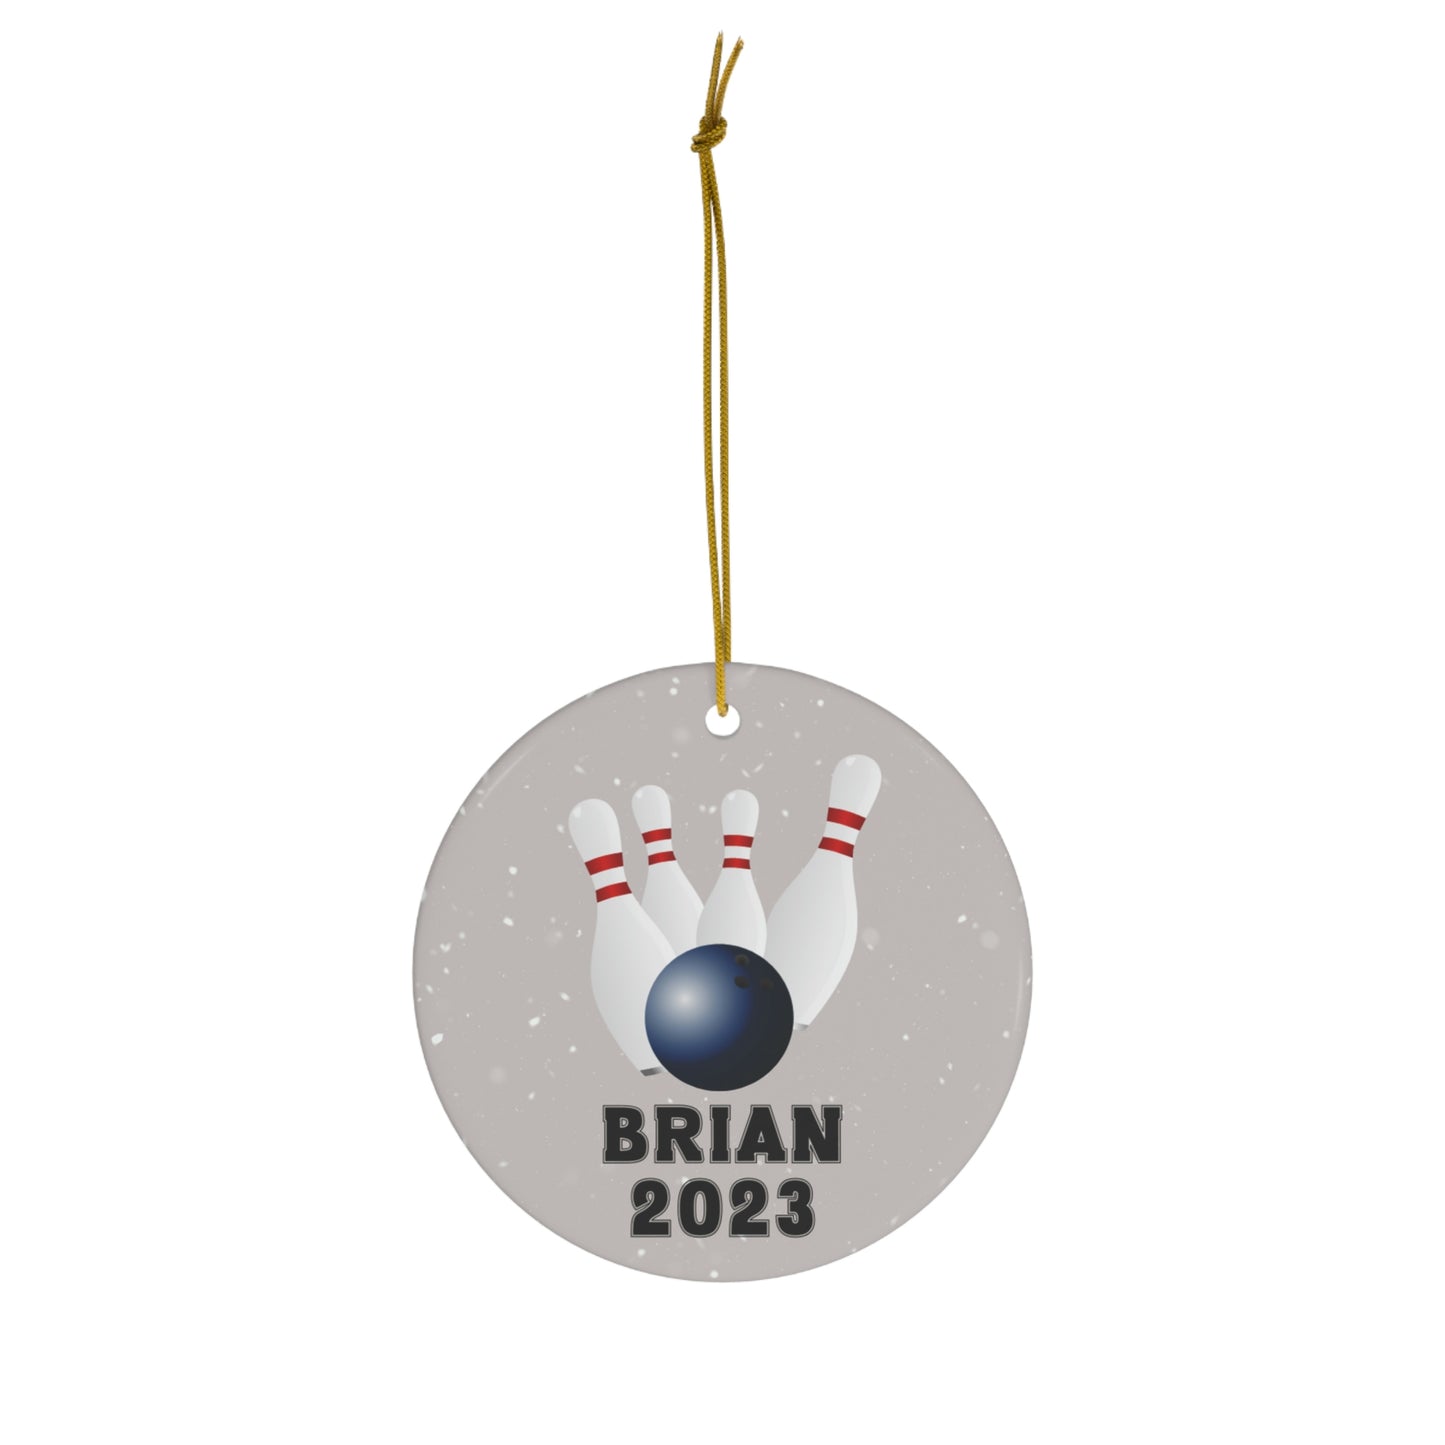 Bowling Ornament, 2023 Personalized Bowling Christmas Ornament, Ceramic Tree Ornament for Bowlers